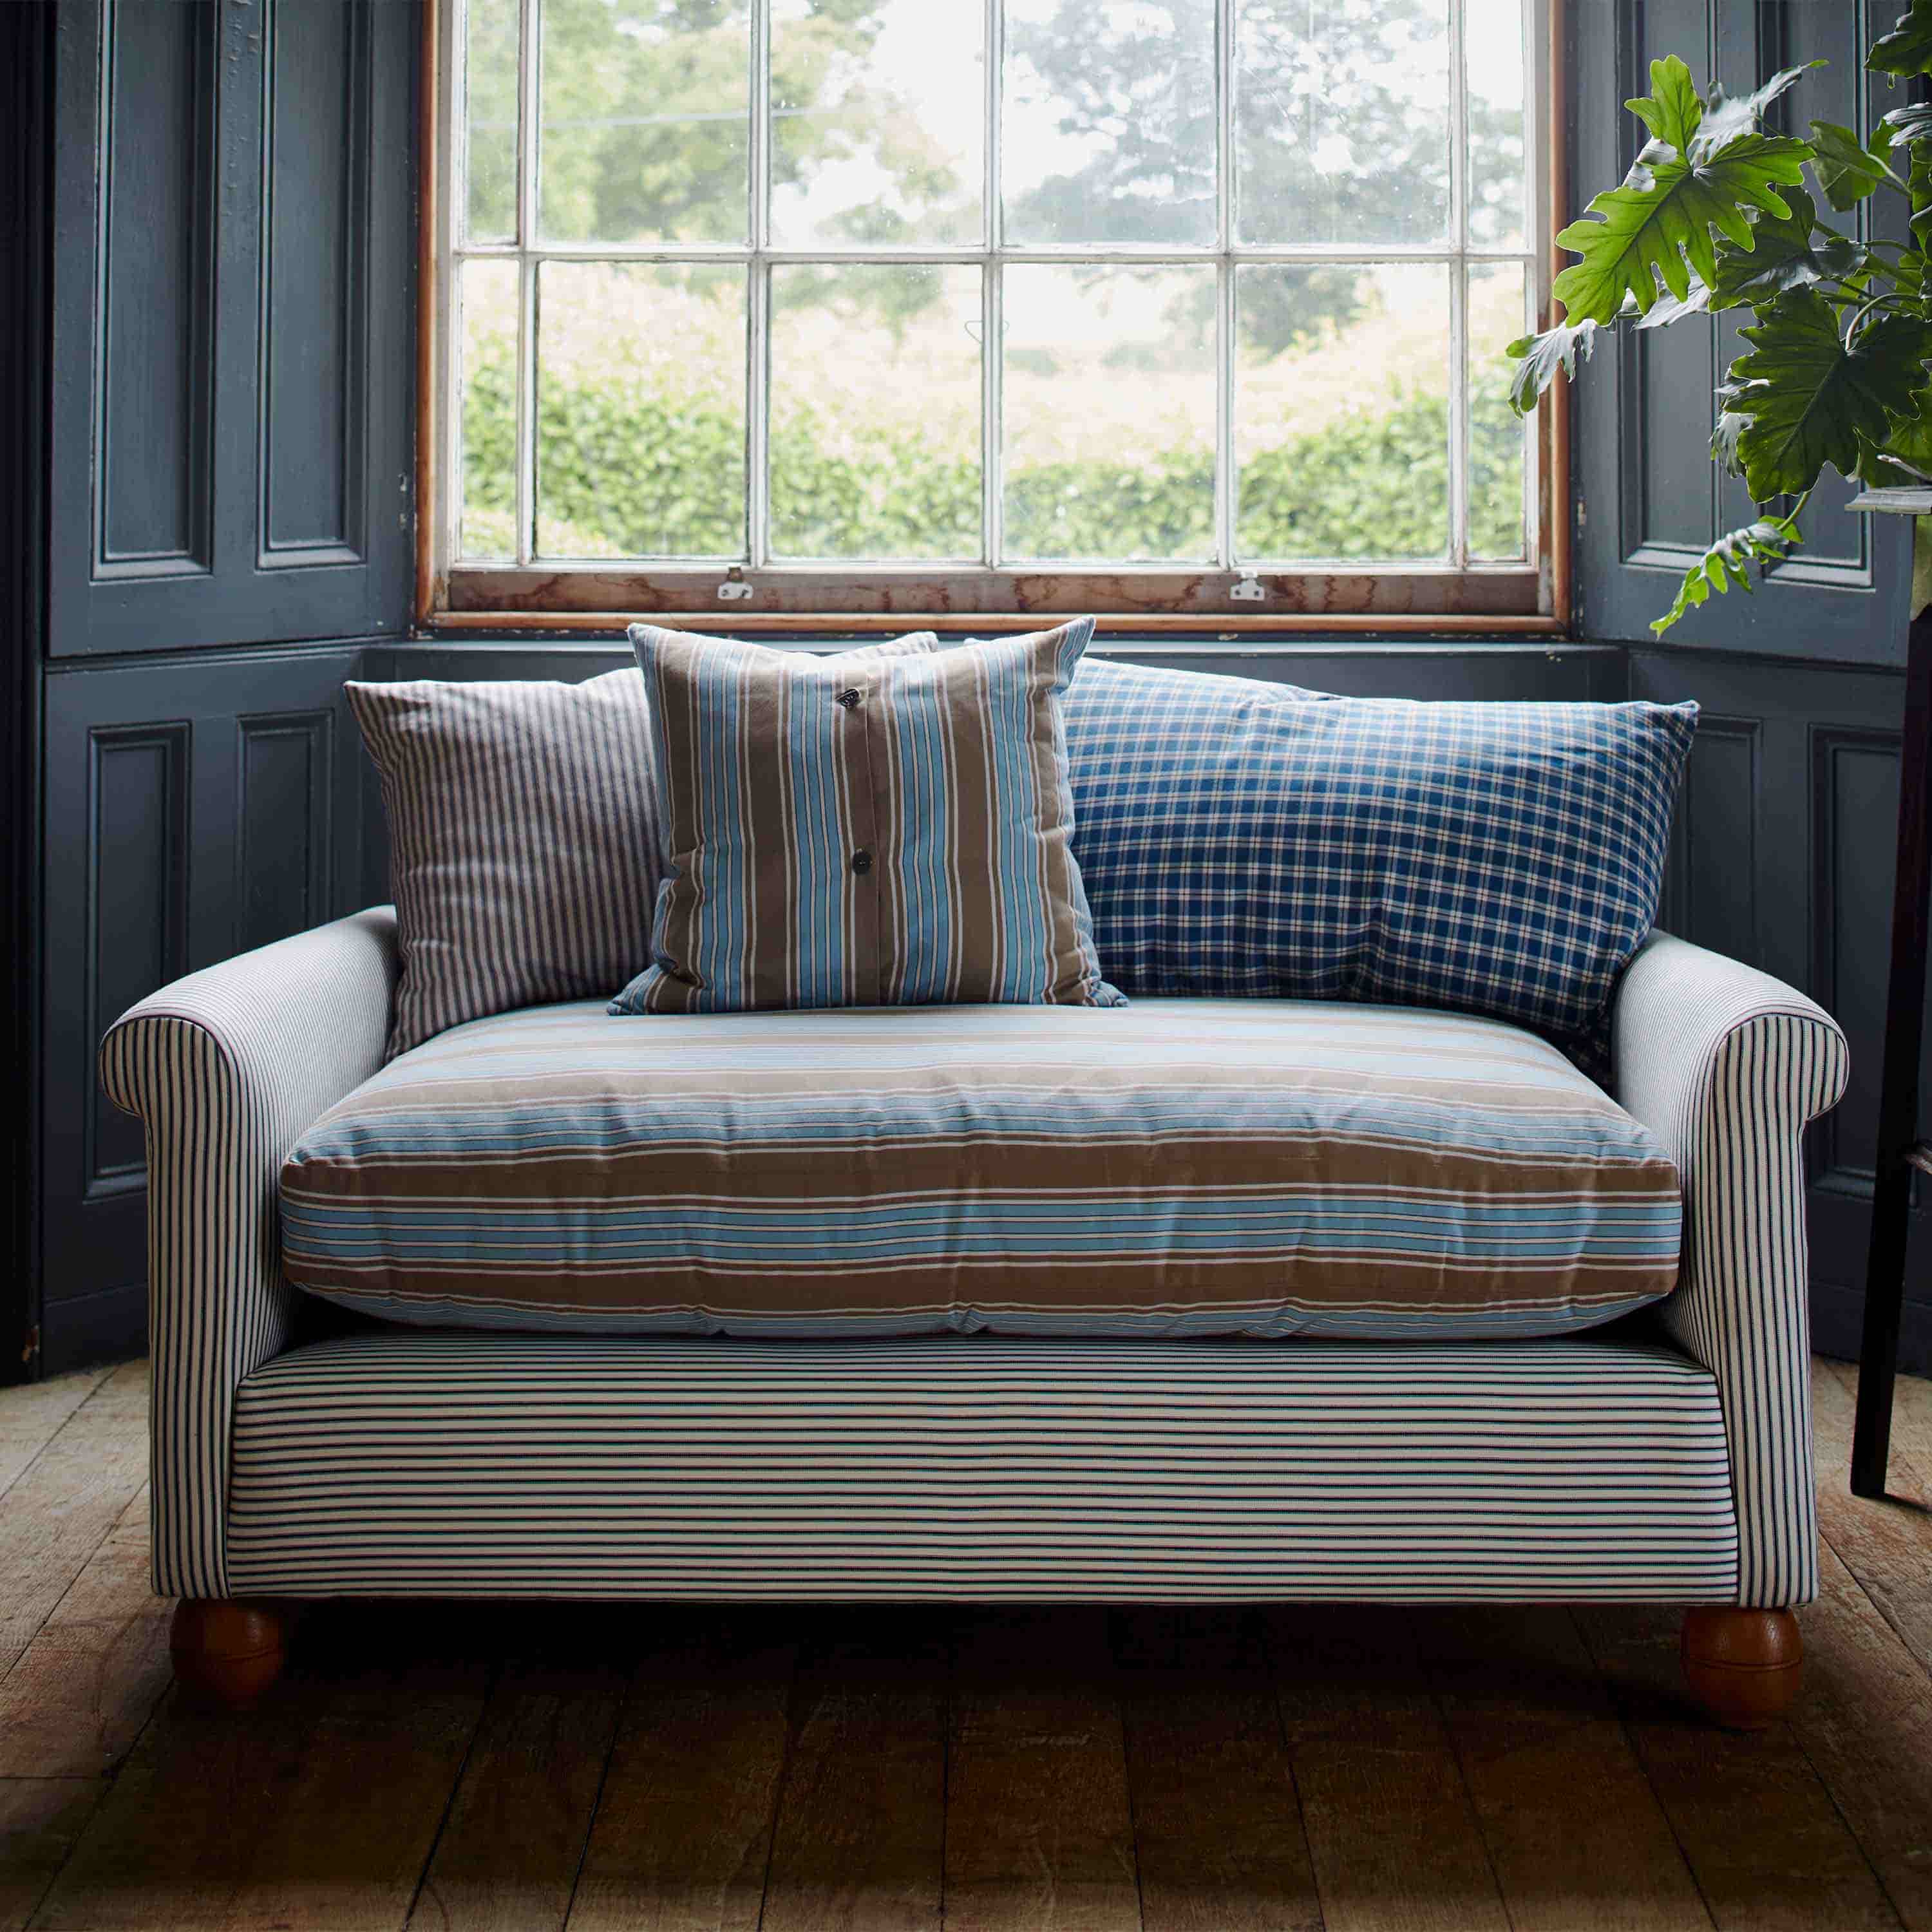  Idler 2 Seater Sofa in Laidback Linen Cerulean 